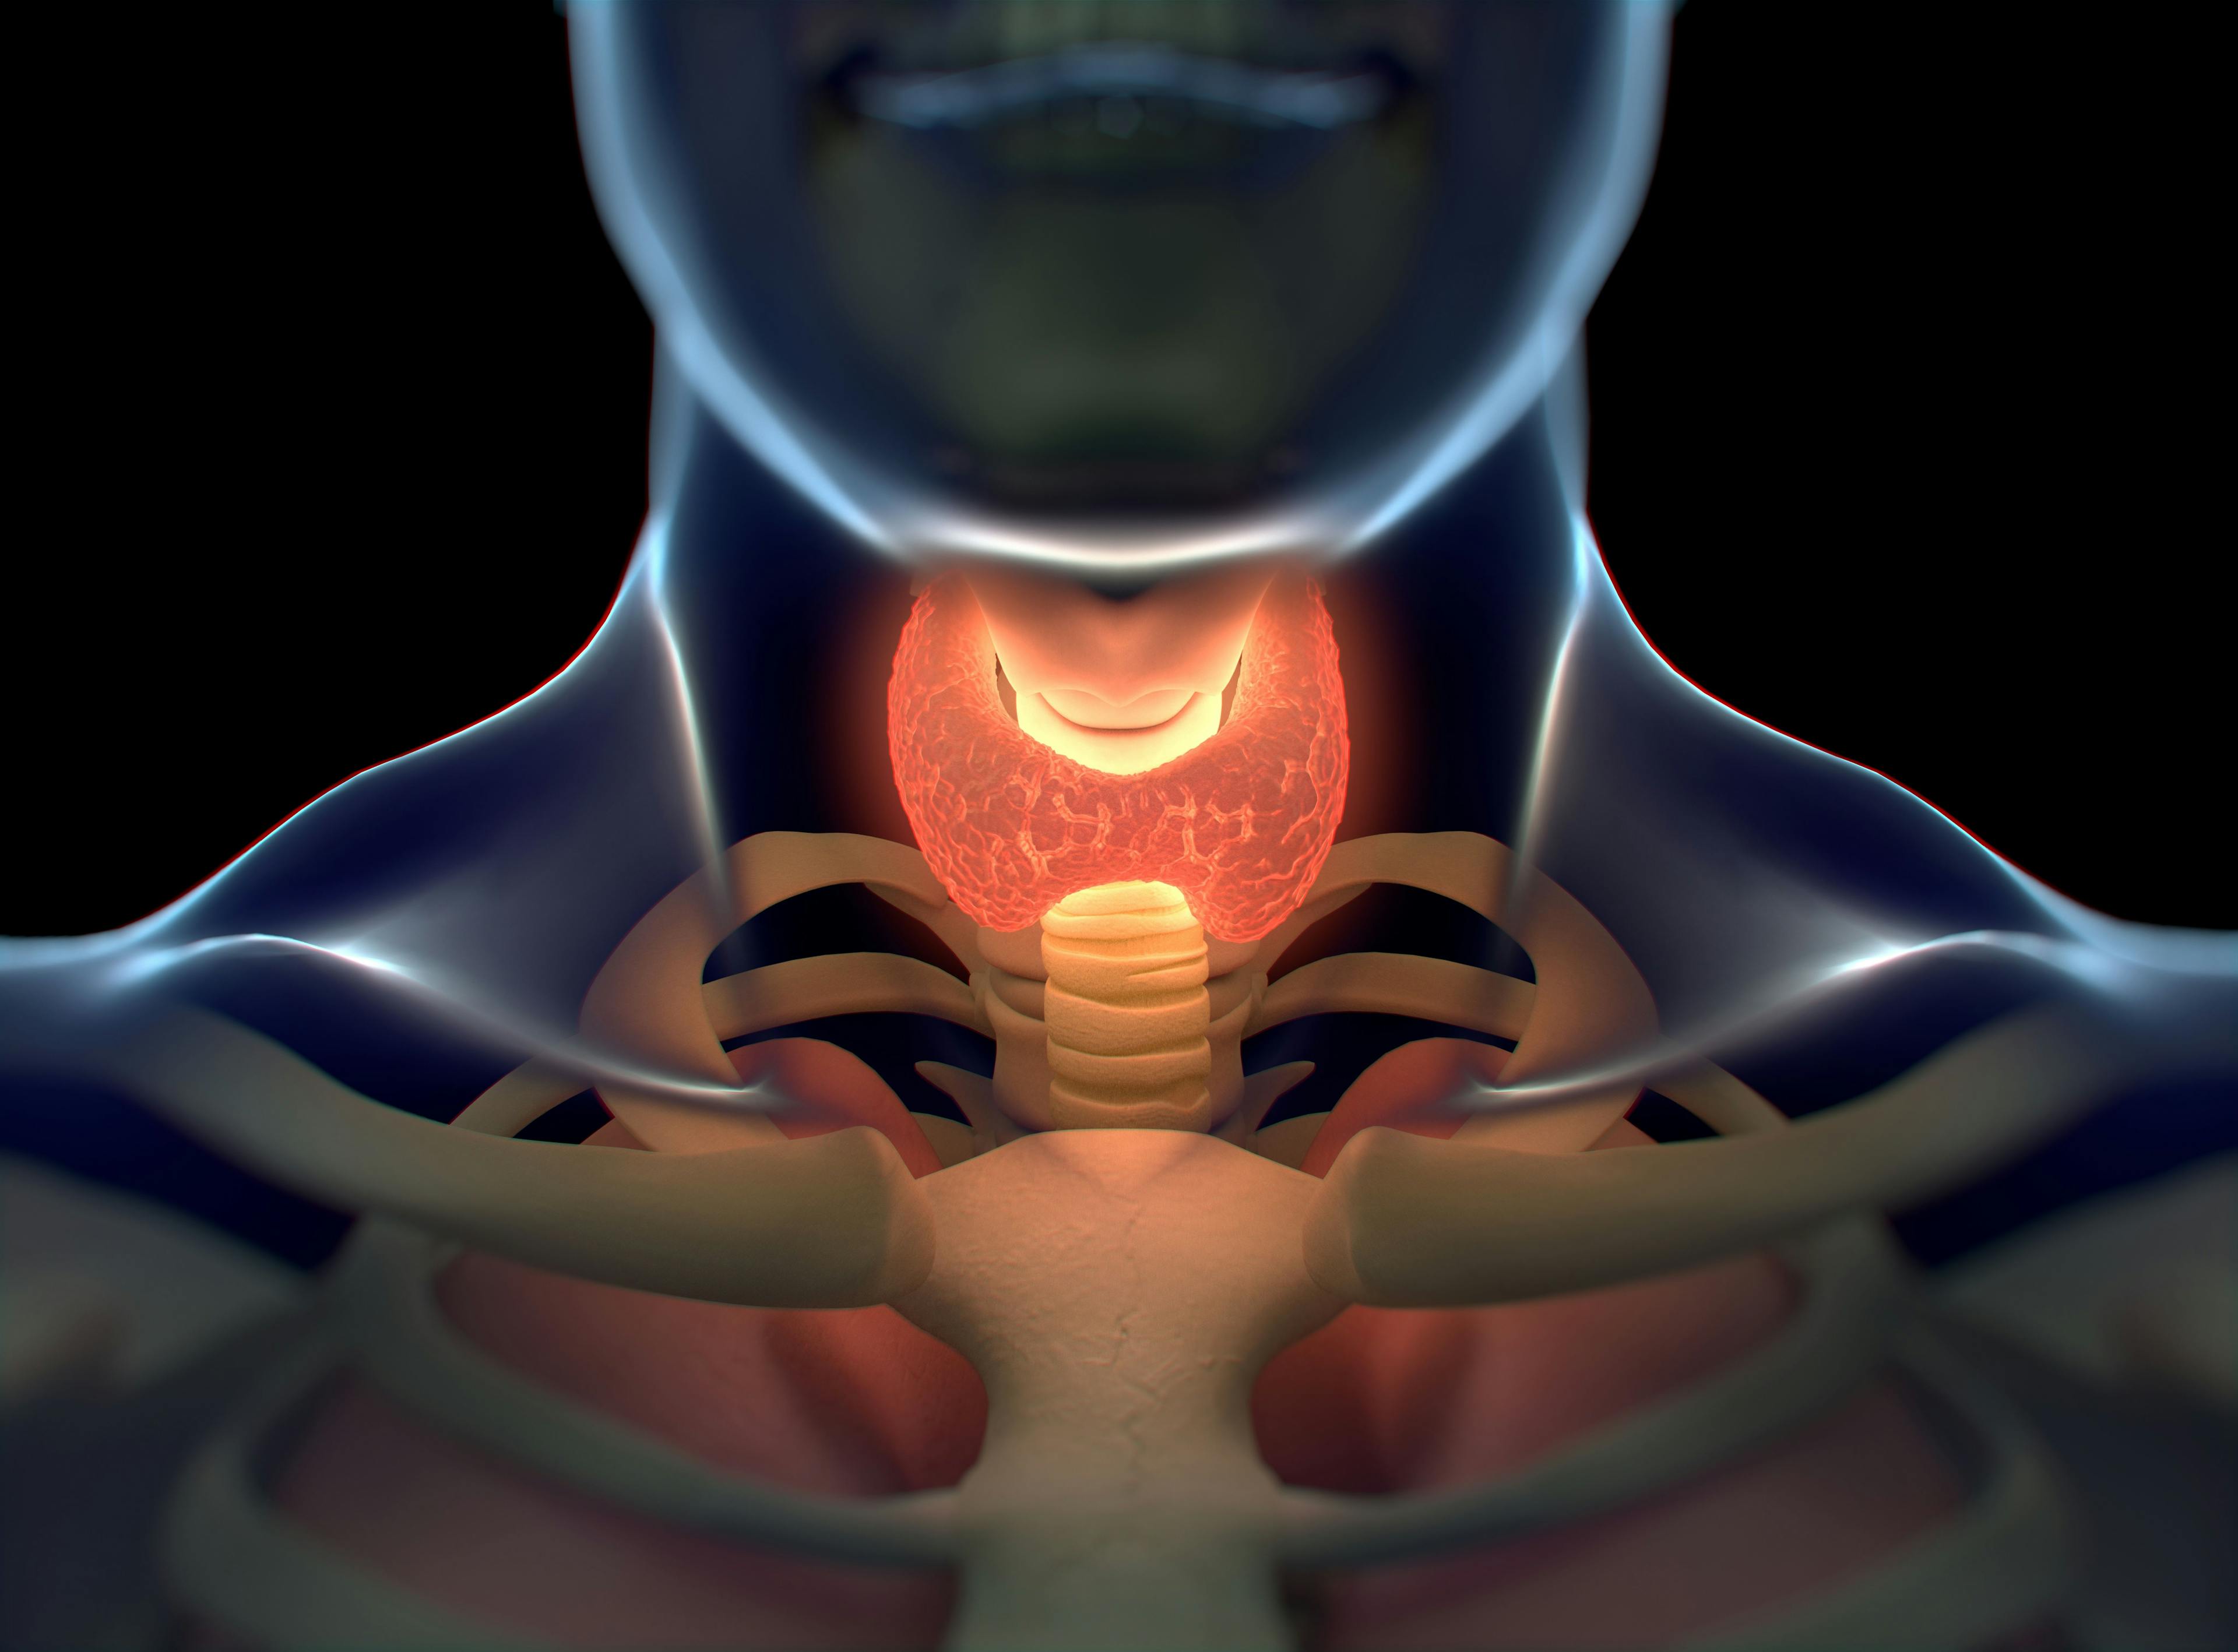 Treatments for Thyroid Disease Are Generally Effective and Safe